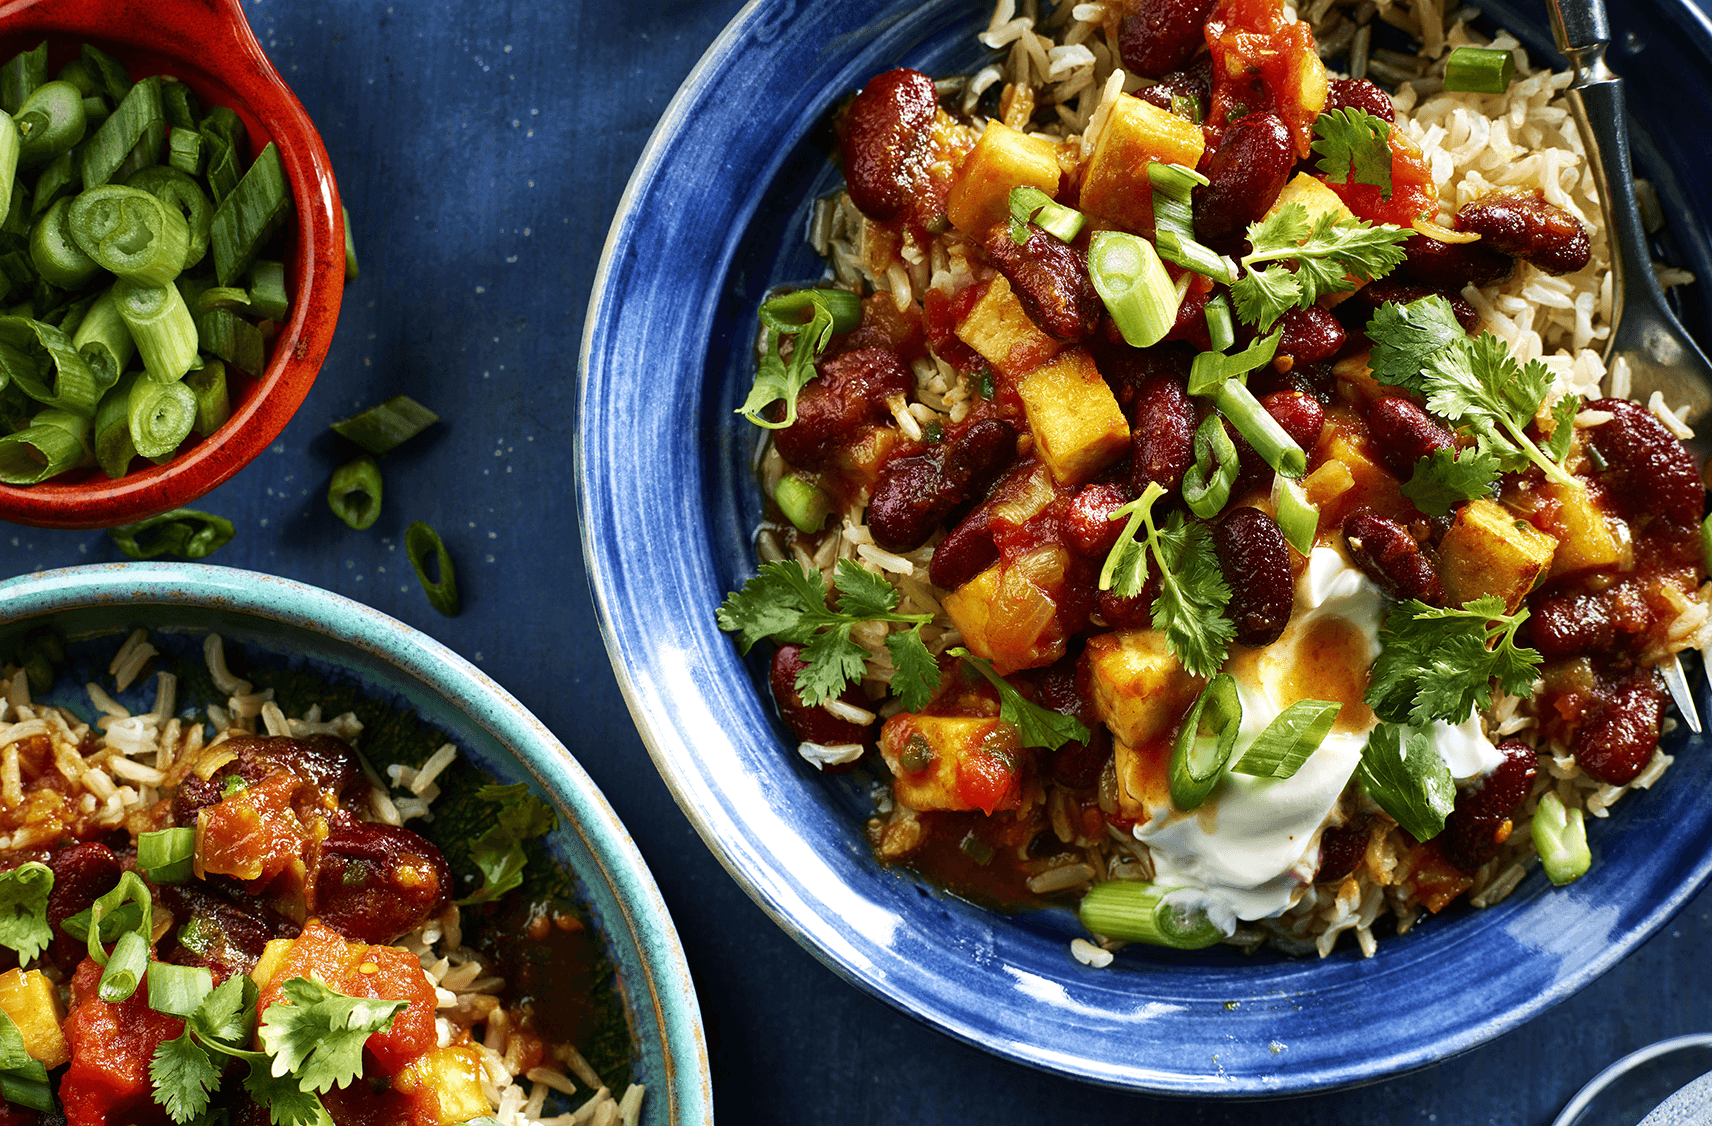 Scallion, coriander and sour cream top kidney bean curry and rice in bowls
